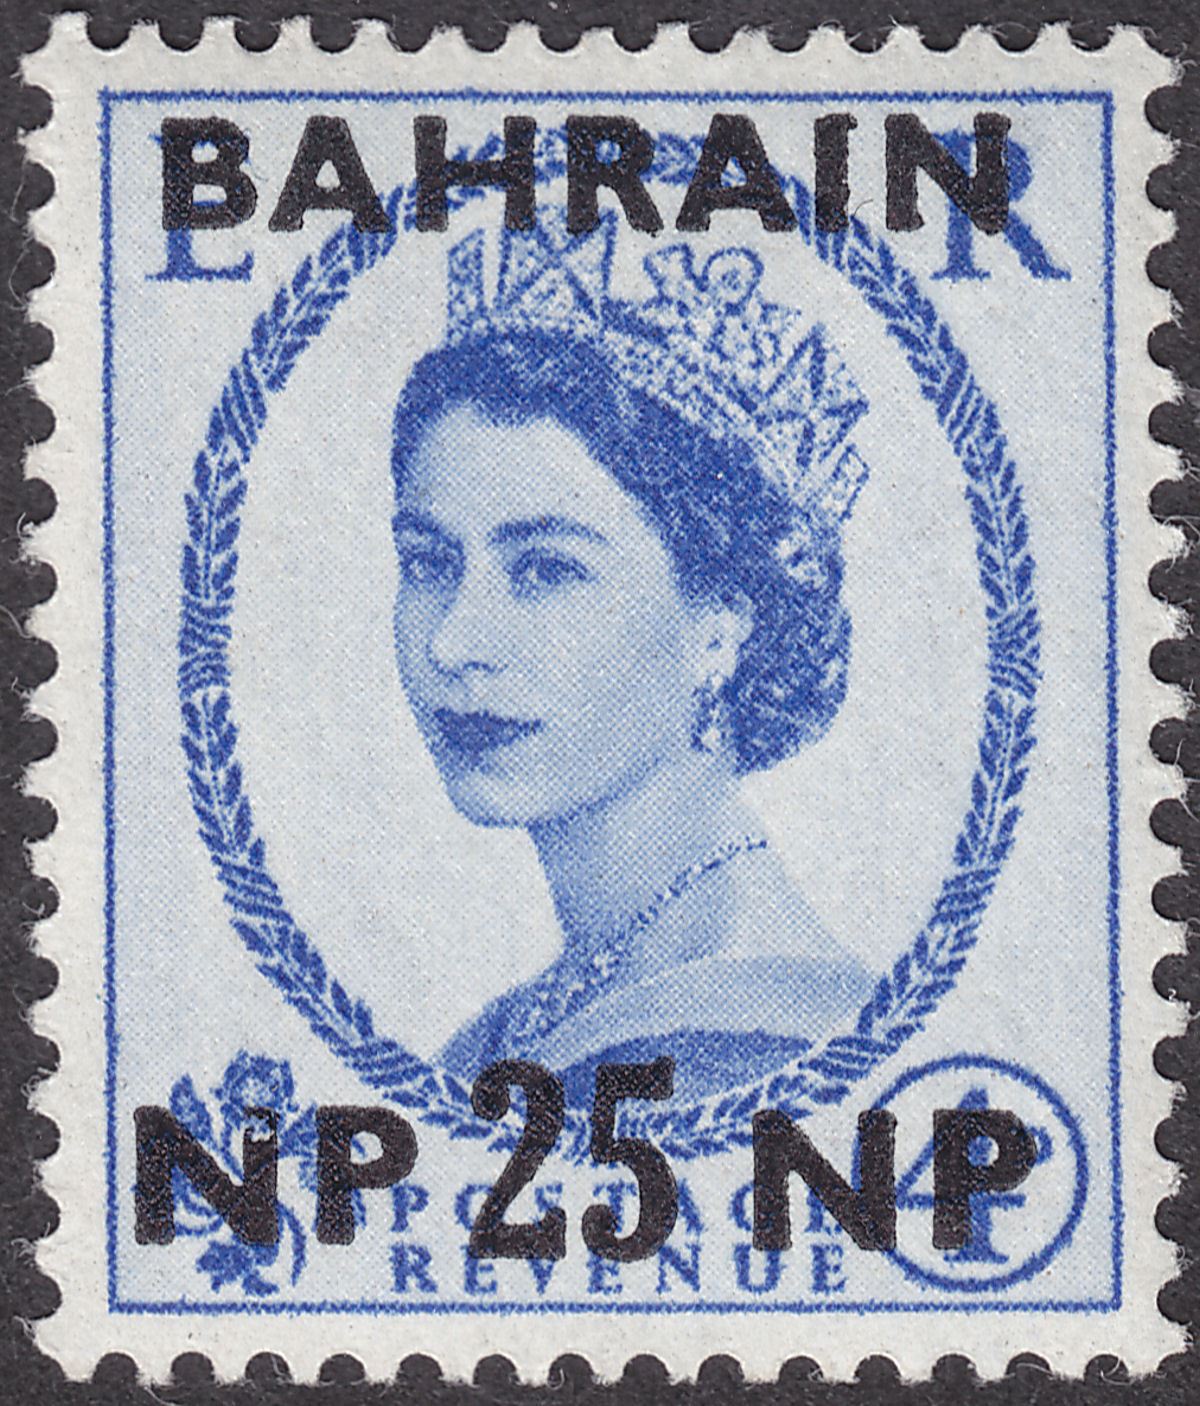 Bahrain 1957 QEII 25np Surcharge on 4d Broken N on Left NP Variety Mint